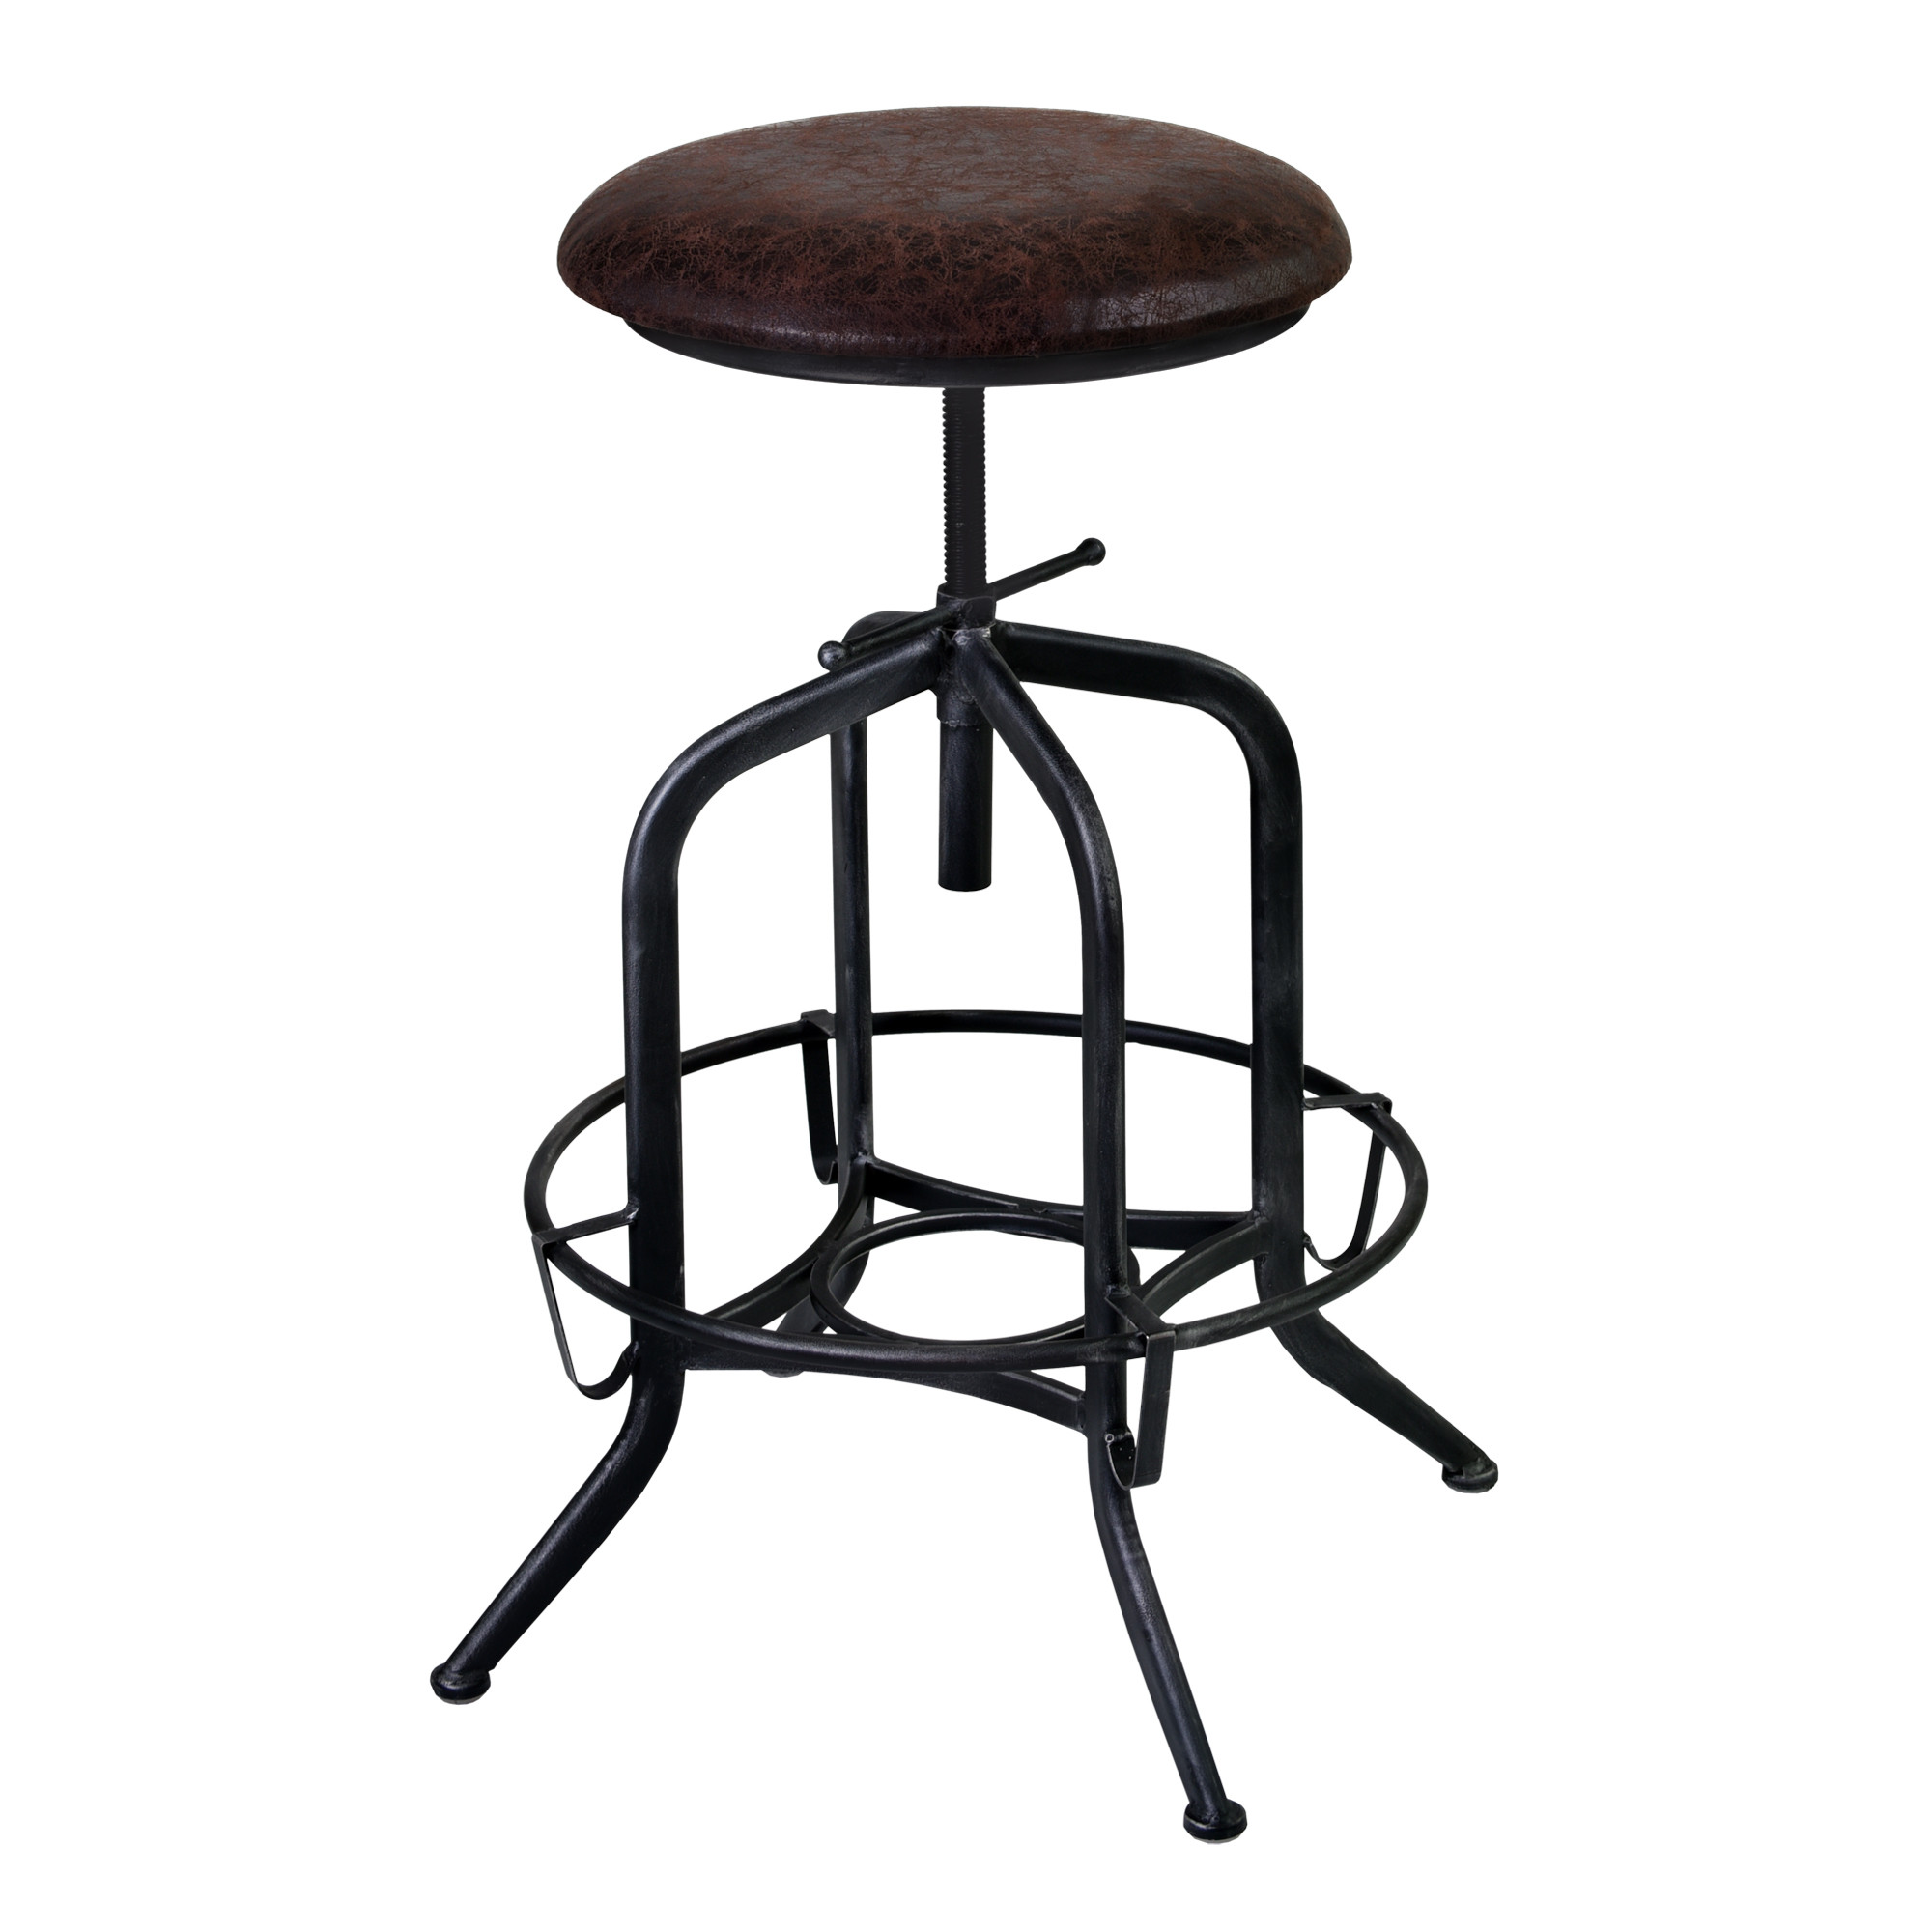 Brown and Black Adjustable Industrial Style Bar Stool